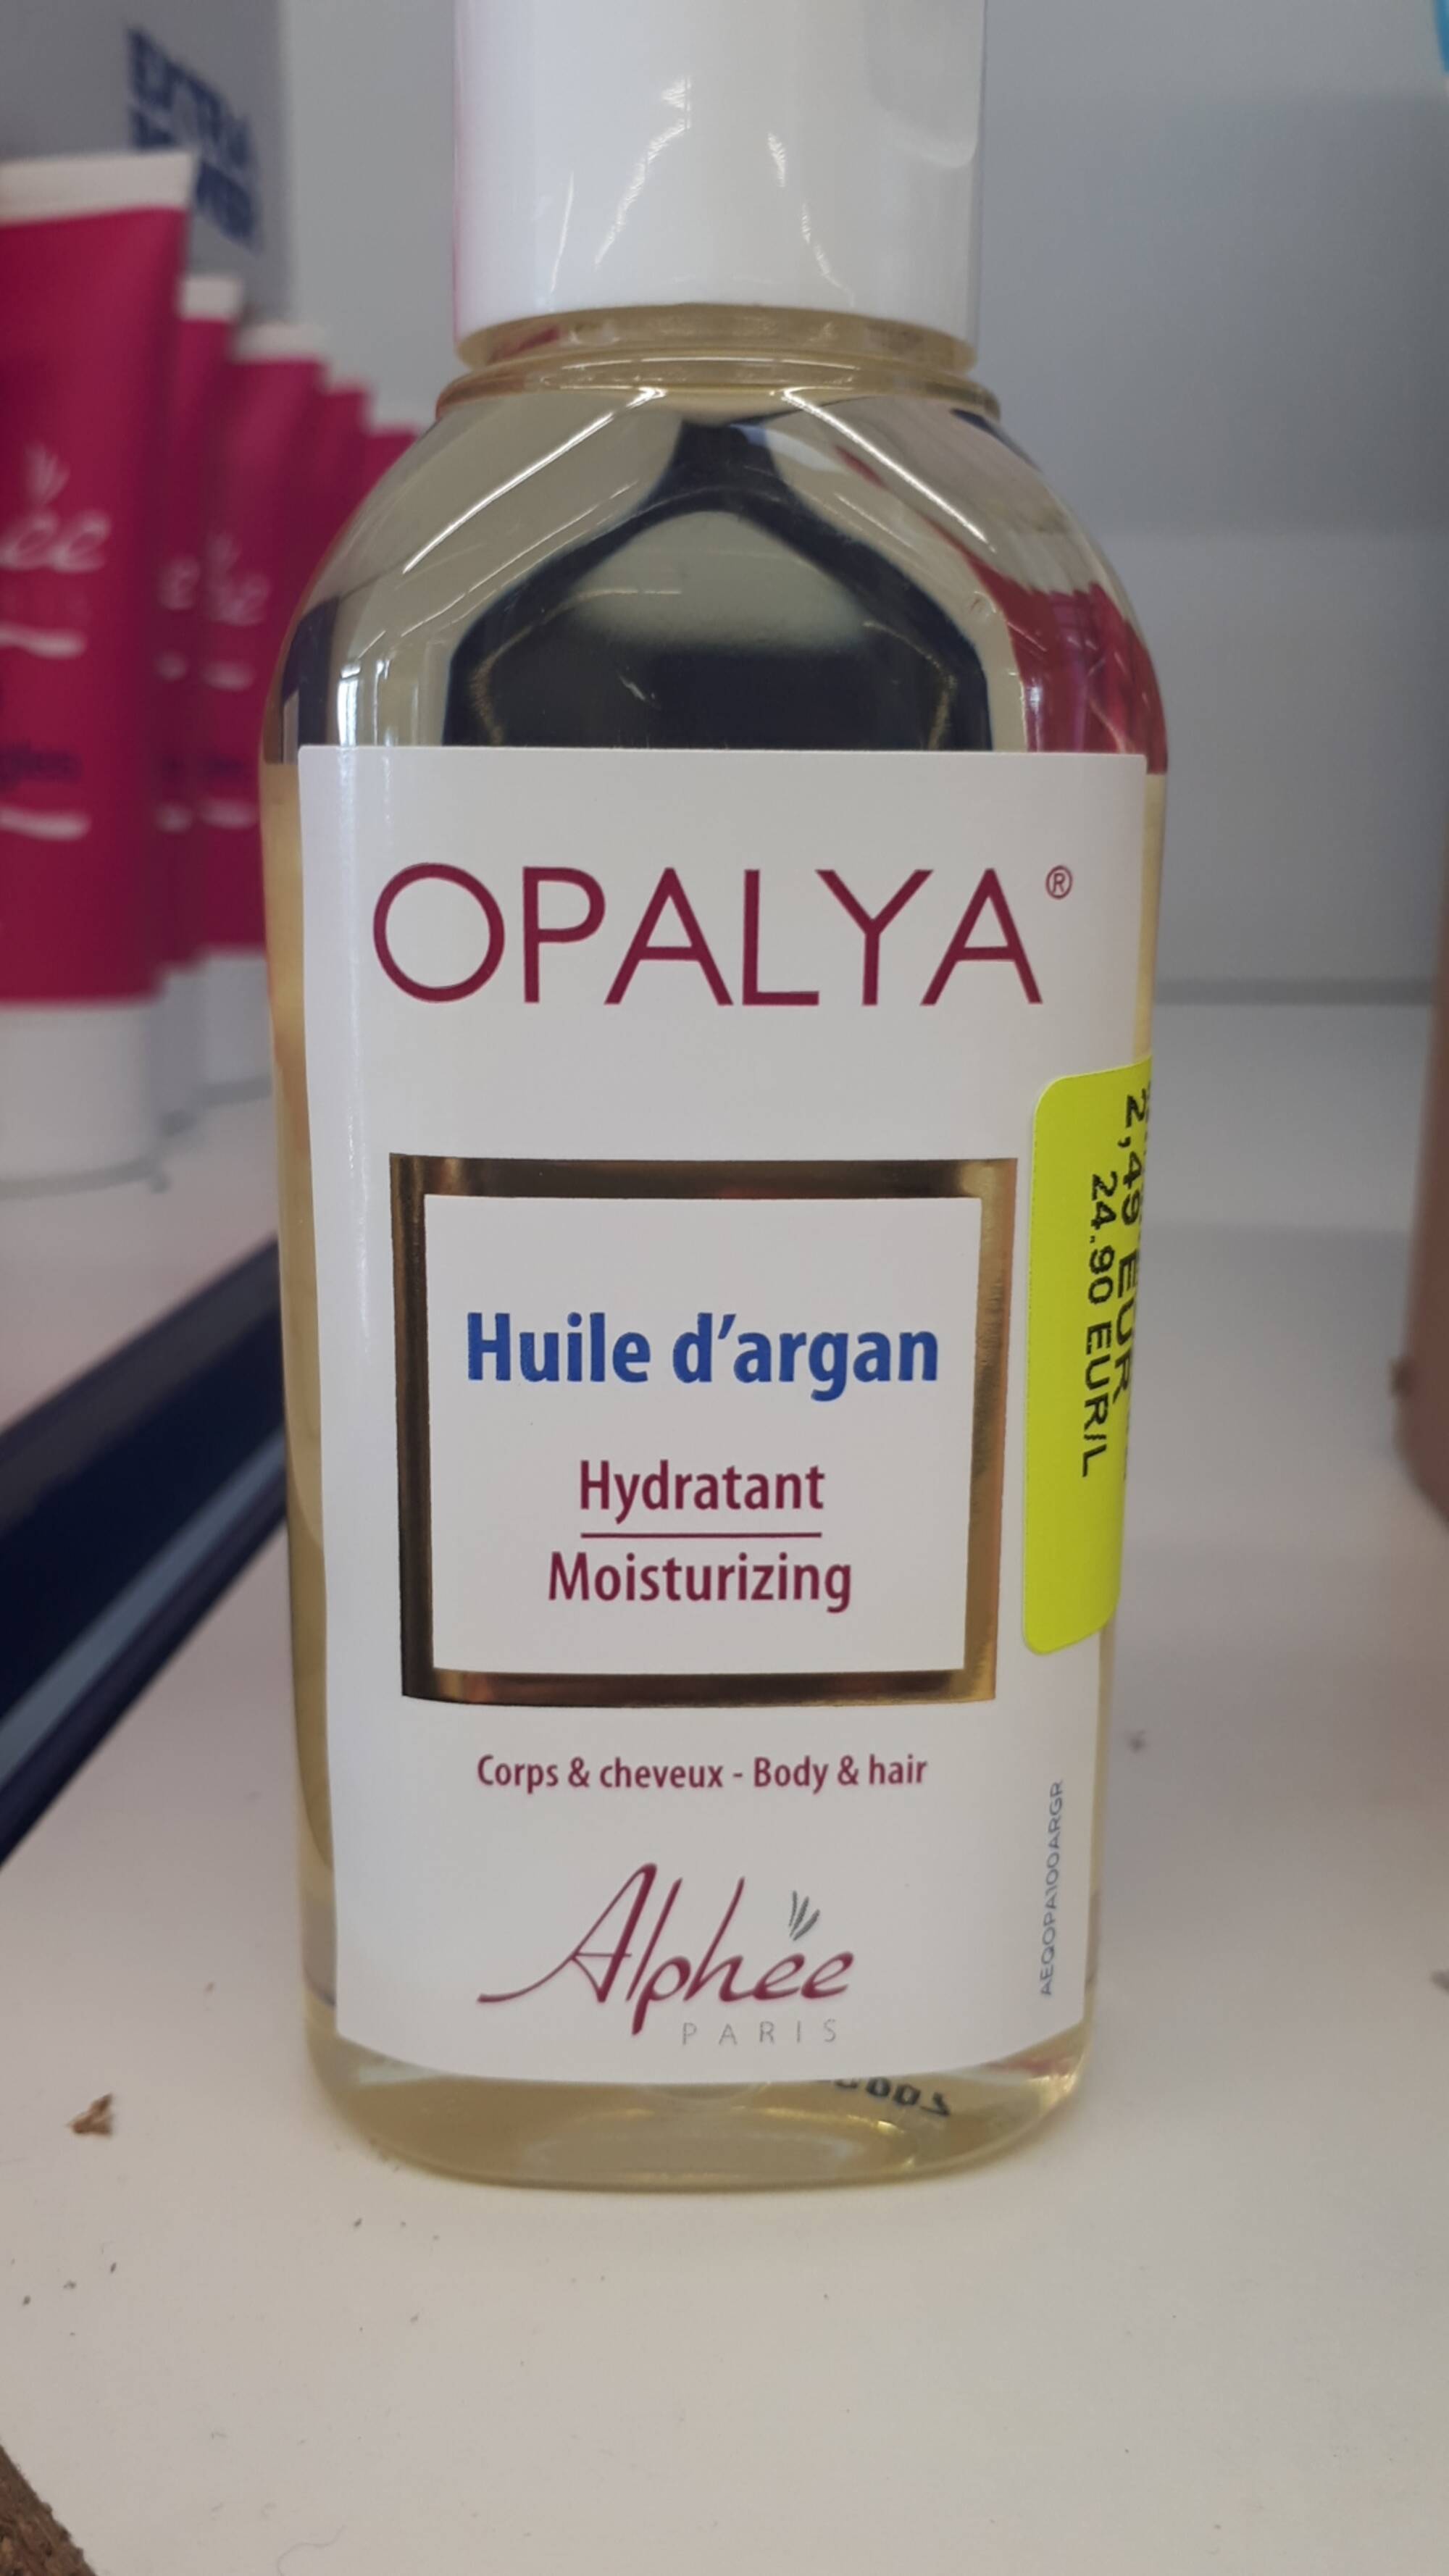 OPALYA - Huile d'argan hydratant corps & cheveux